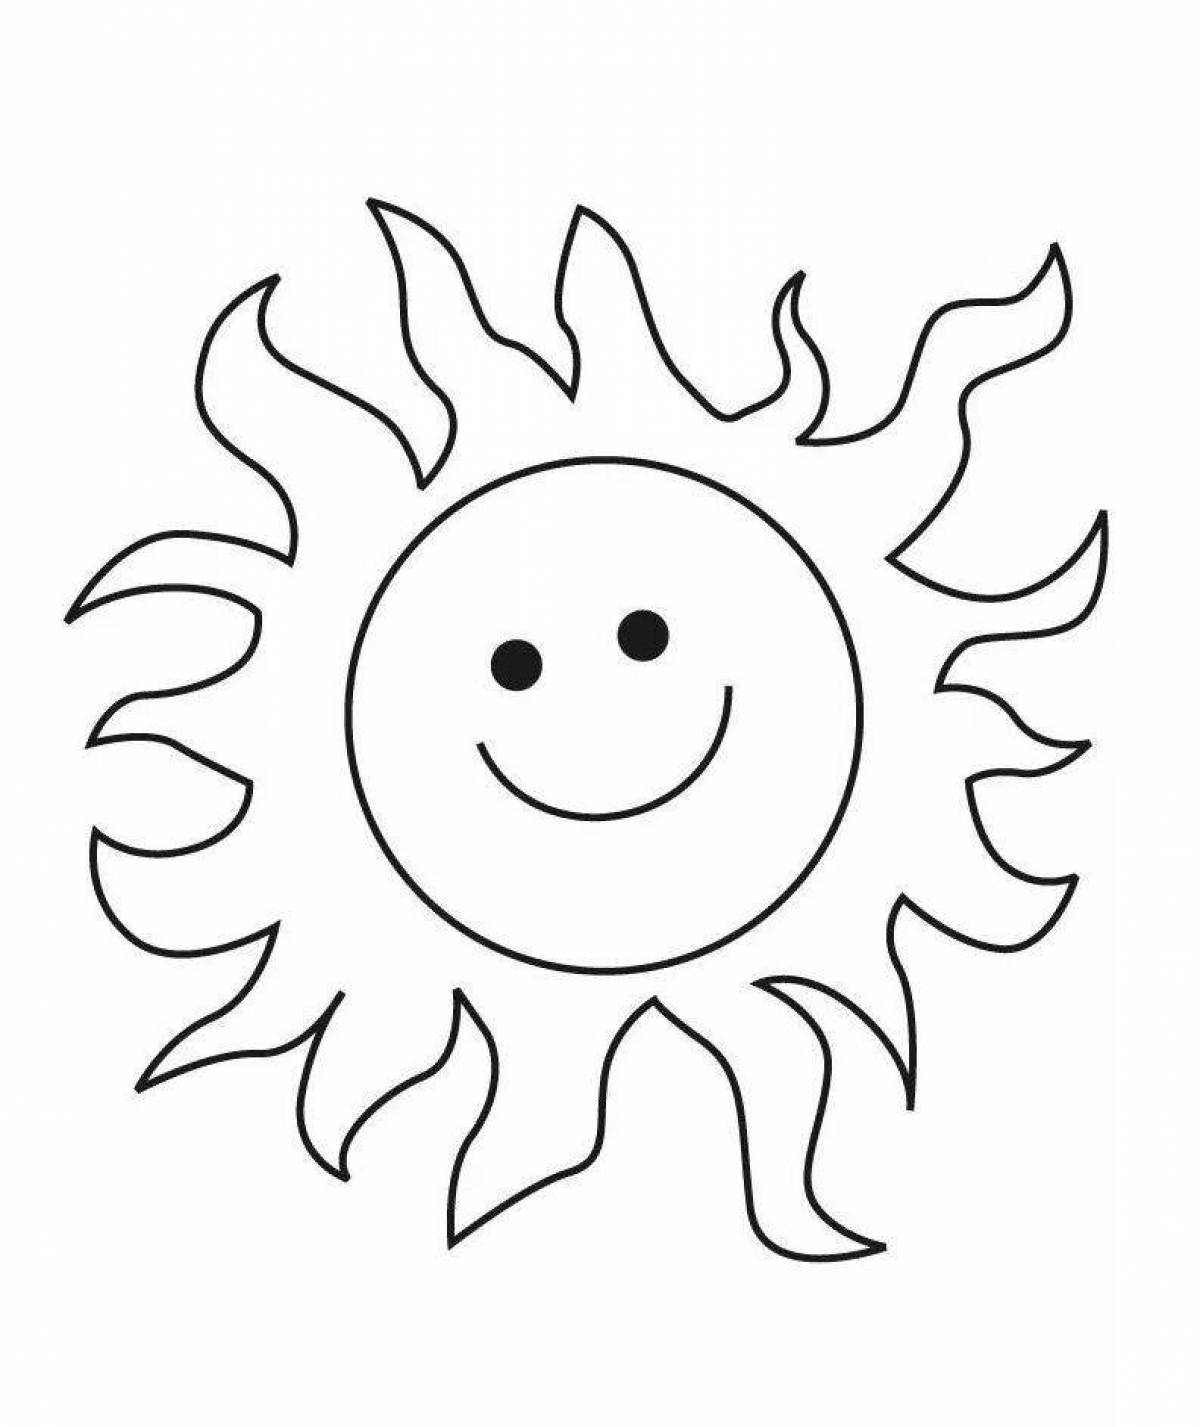 Refreshing sun coloring picture for kids